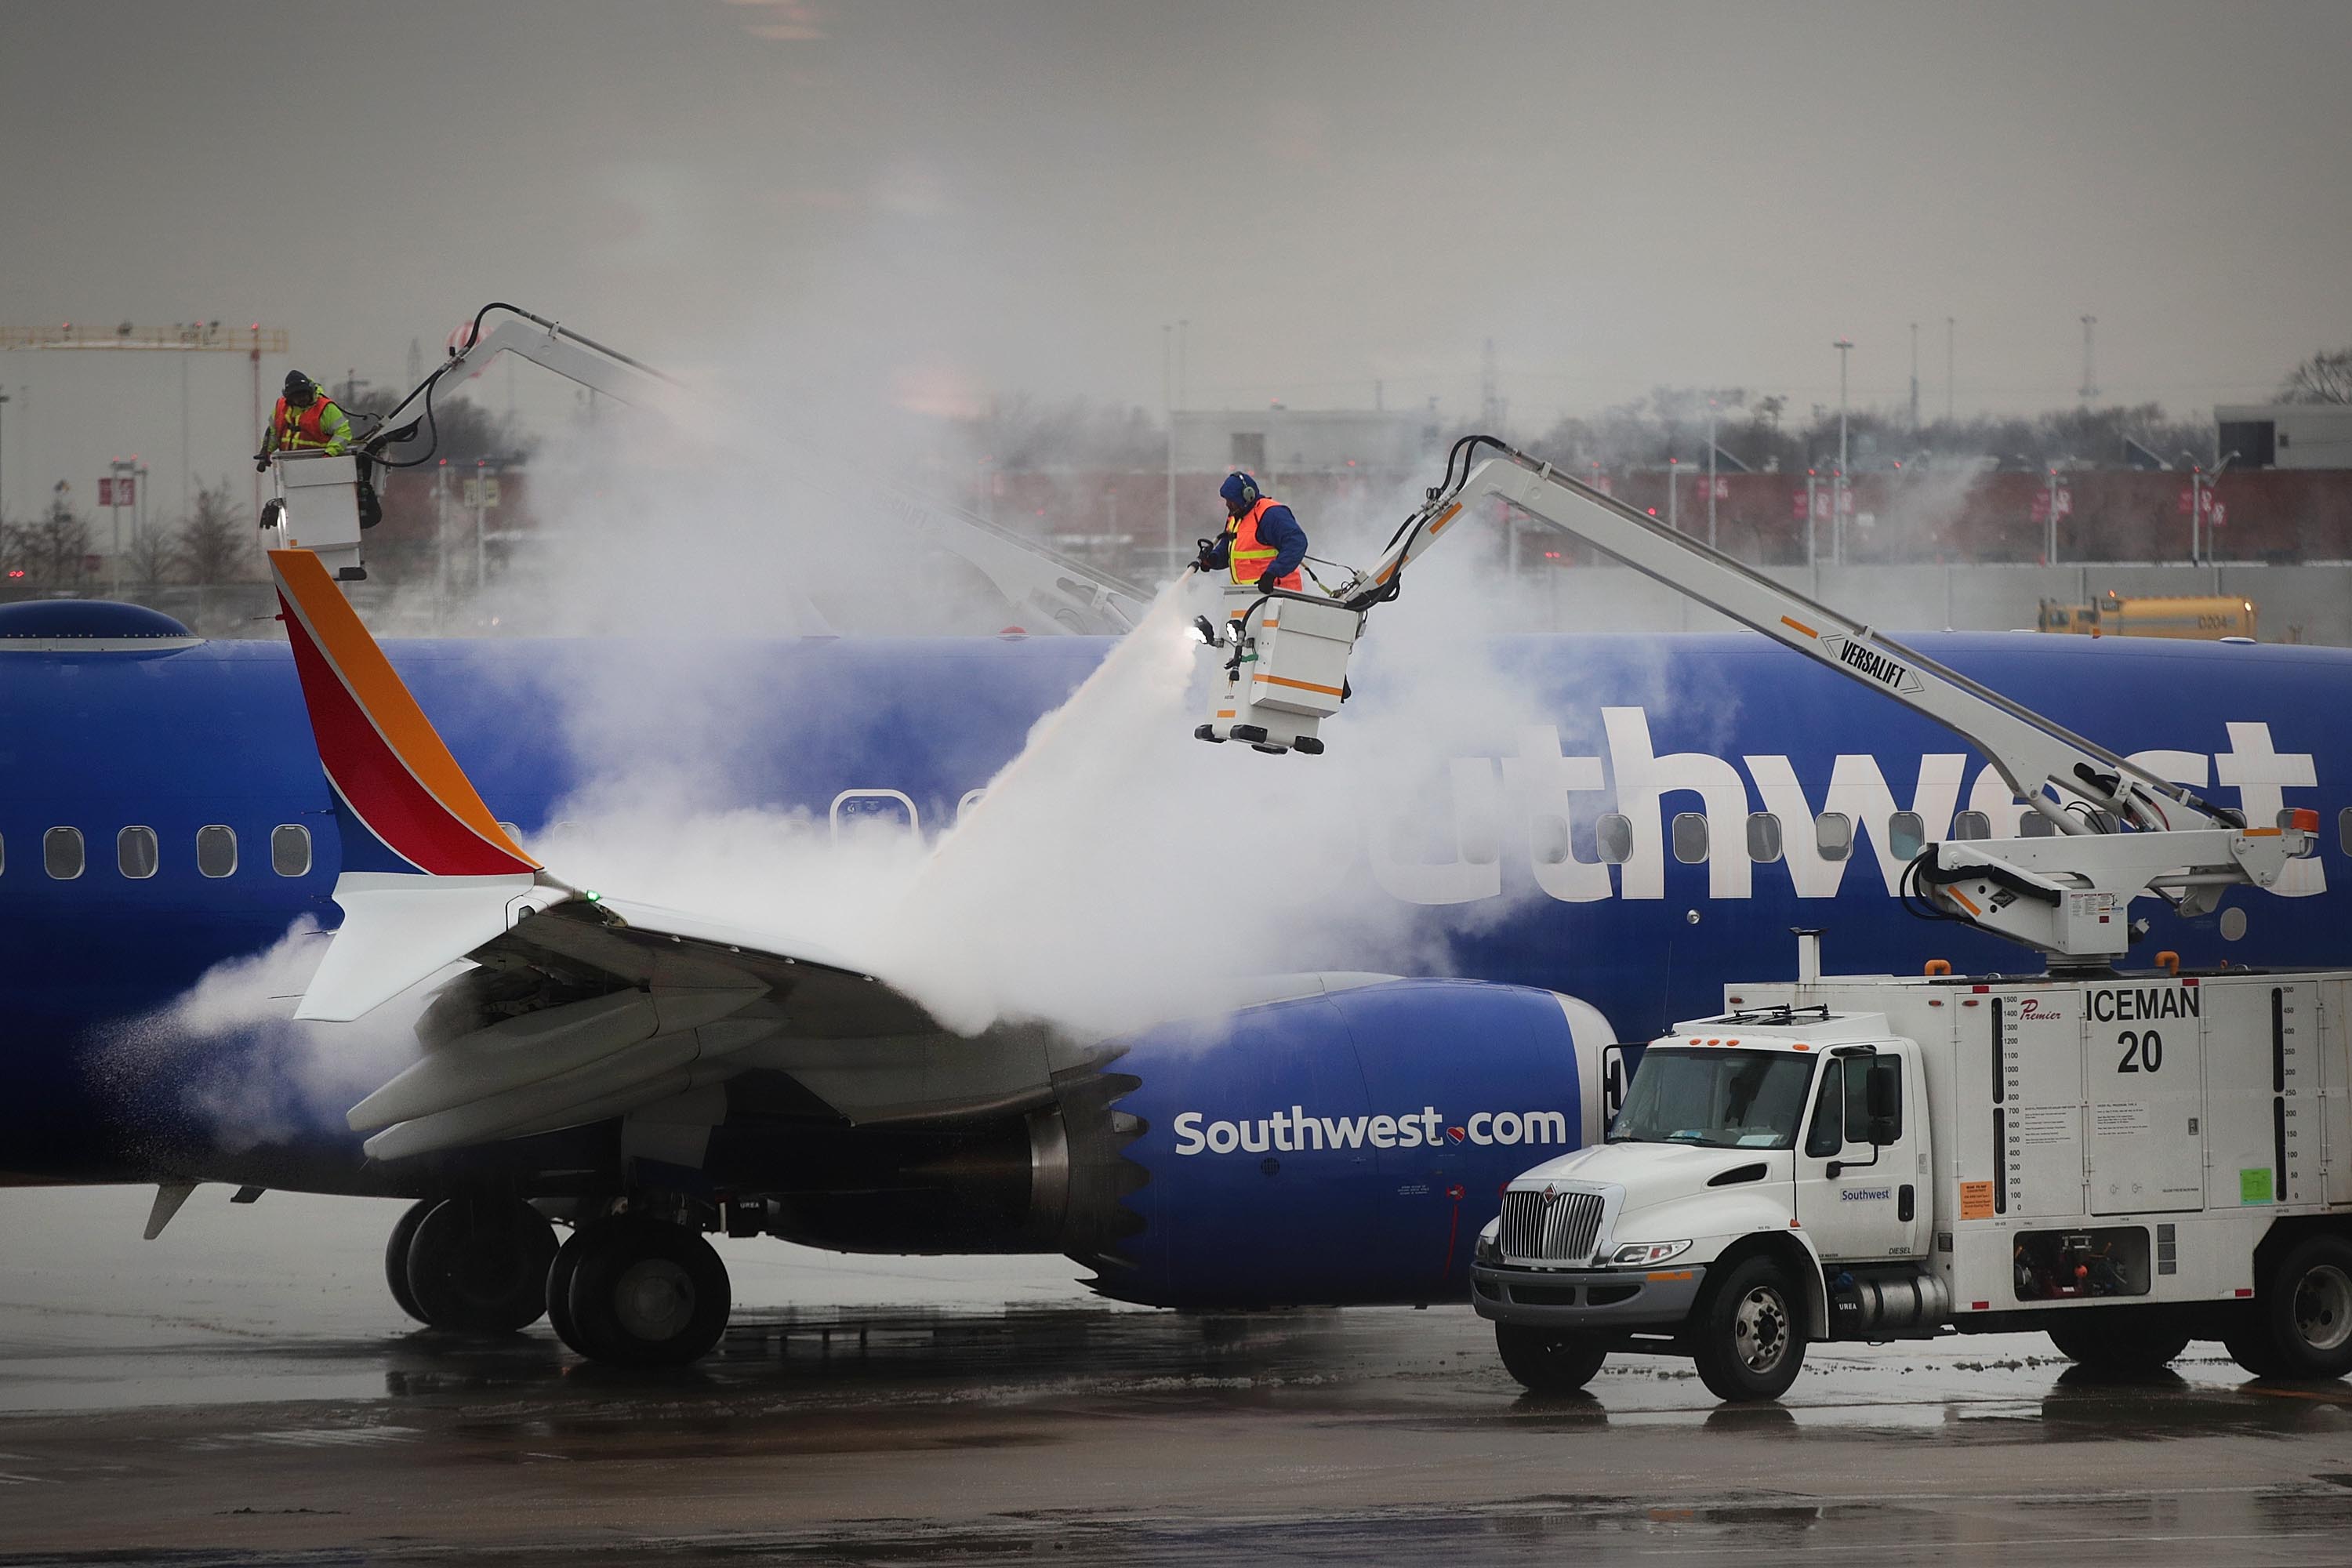 Workers deice a Southwest Airline's aircraft at Midway Airport on January 22, 2019 in Chicago, Illinois. (Scott Olson—Getty Images)